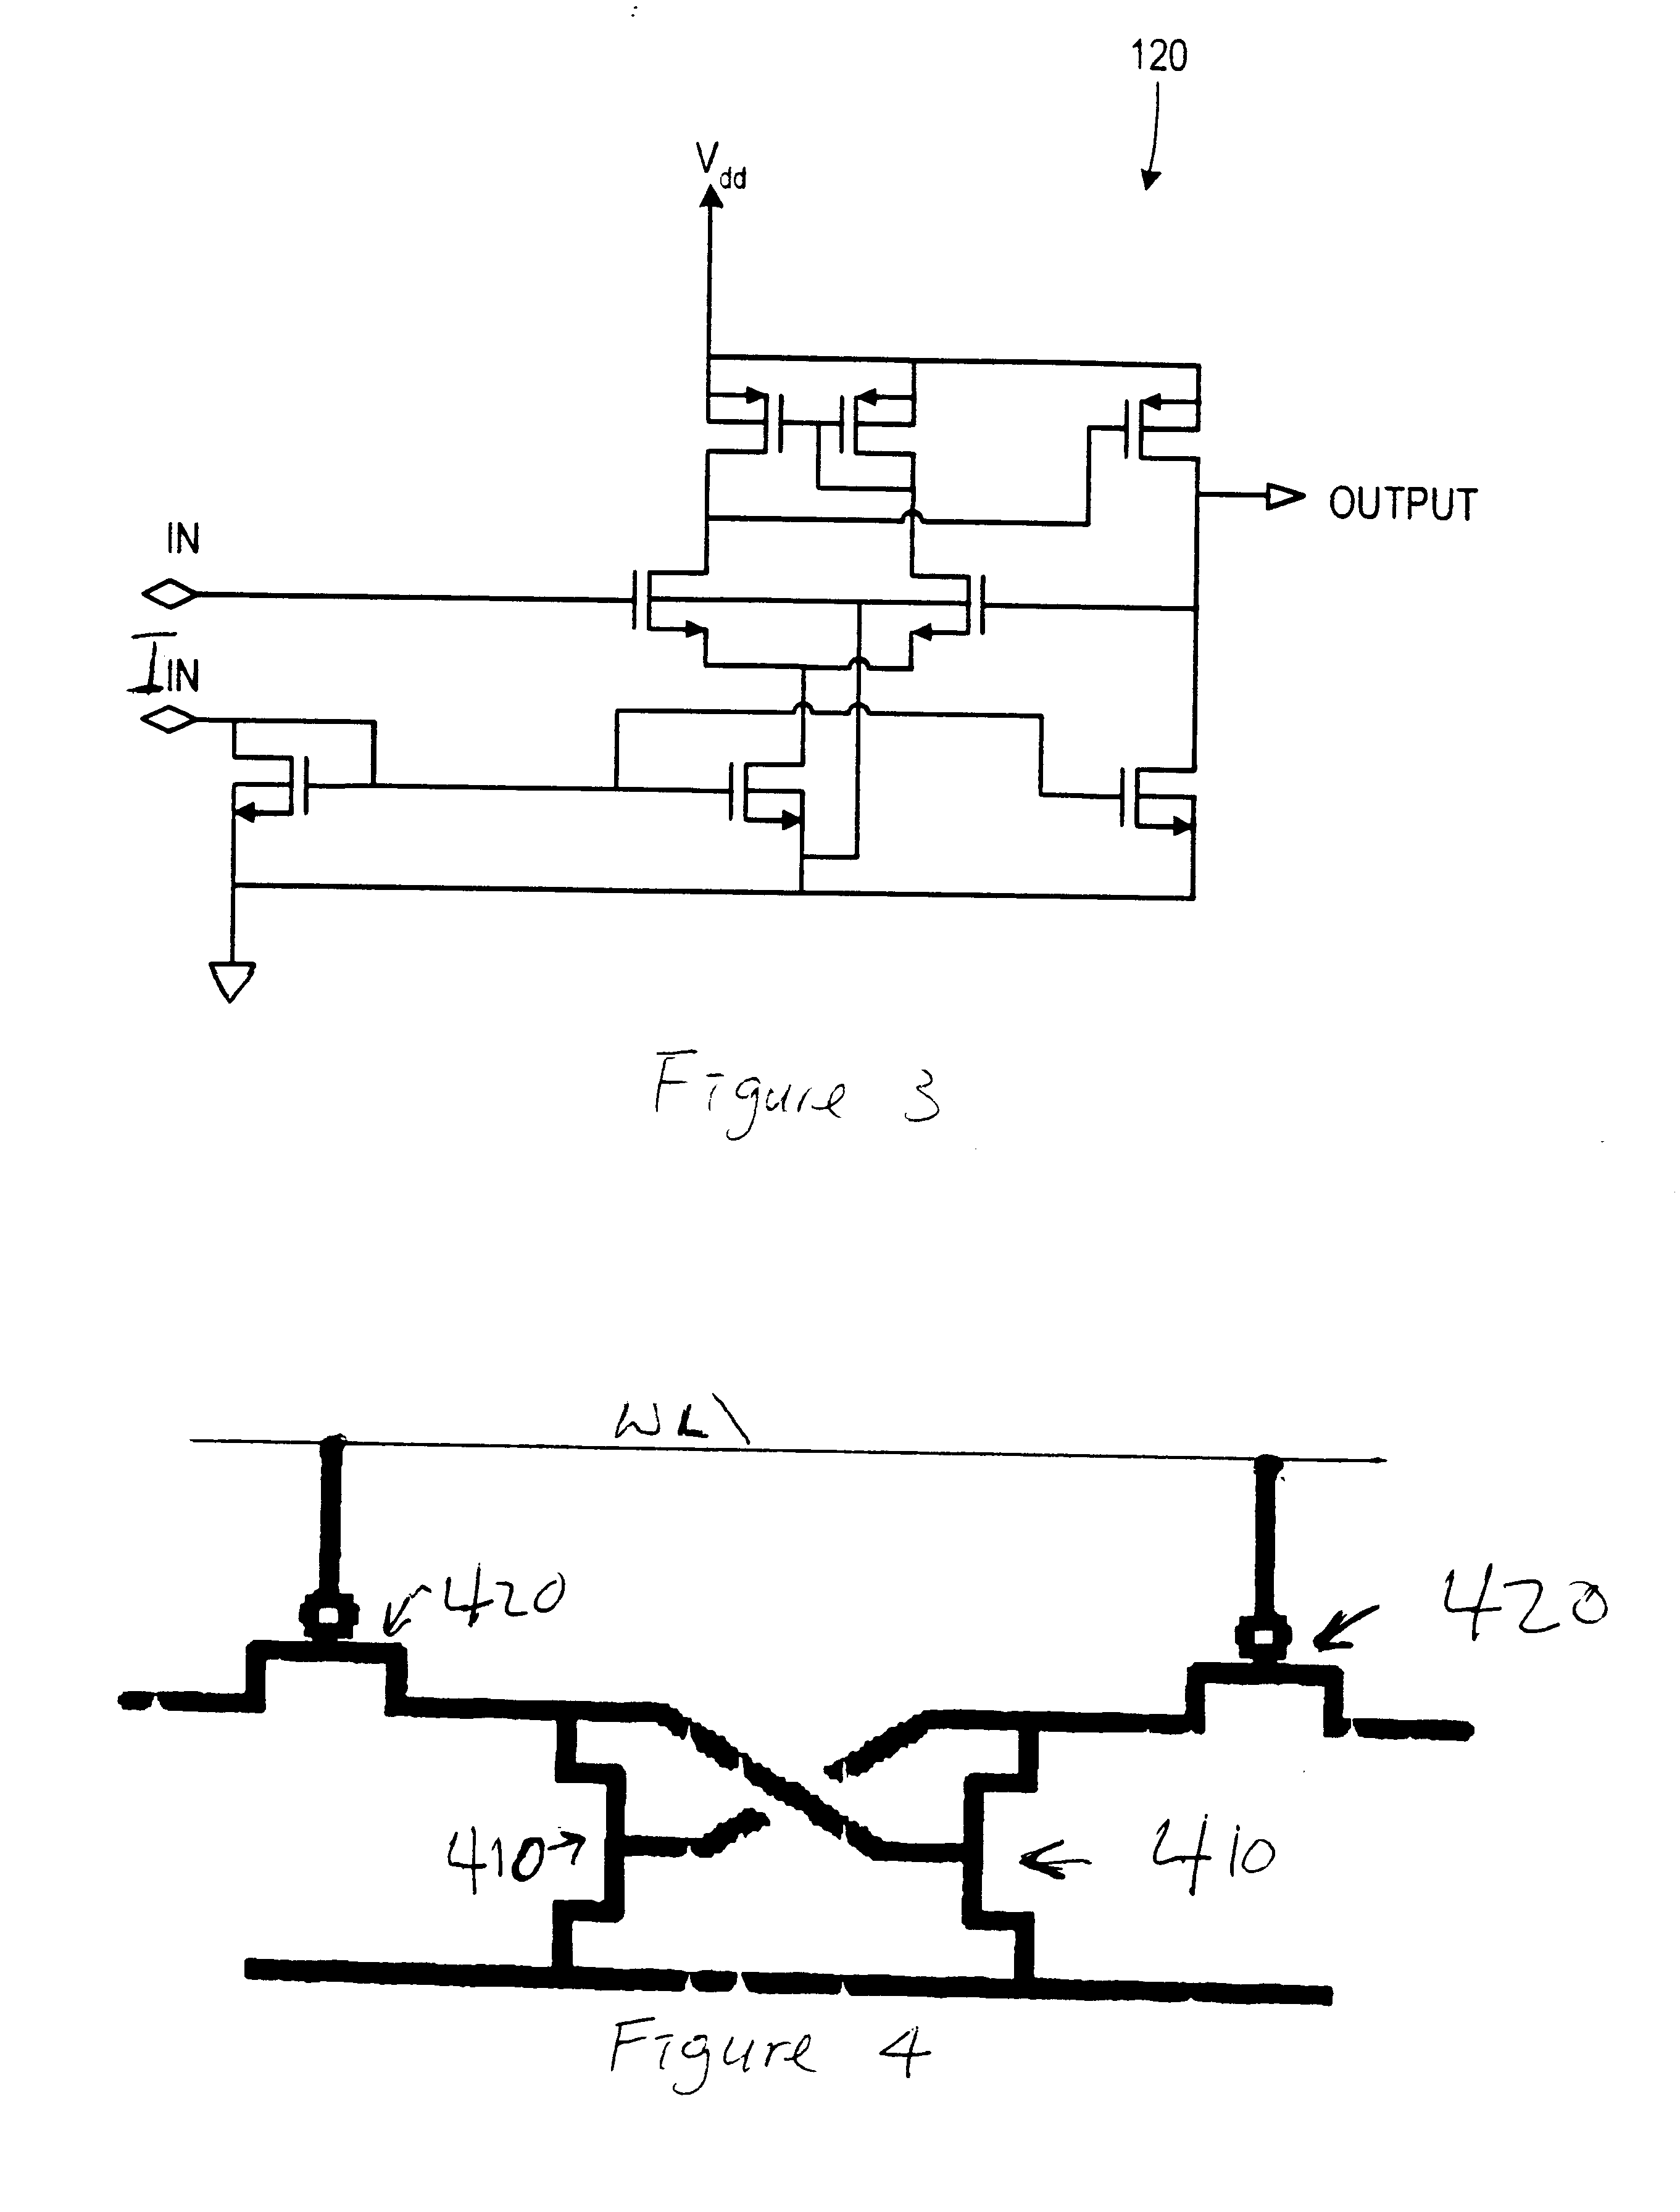 Bias cell for four transistor (4T) SRAM operation